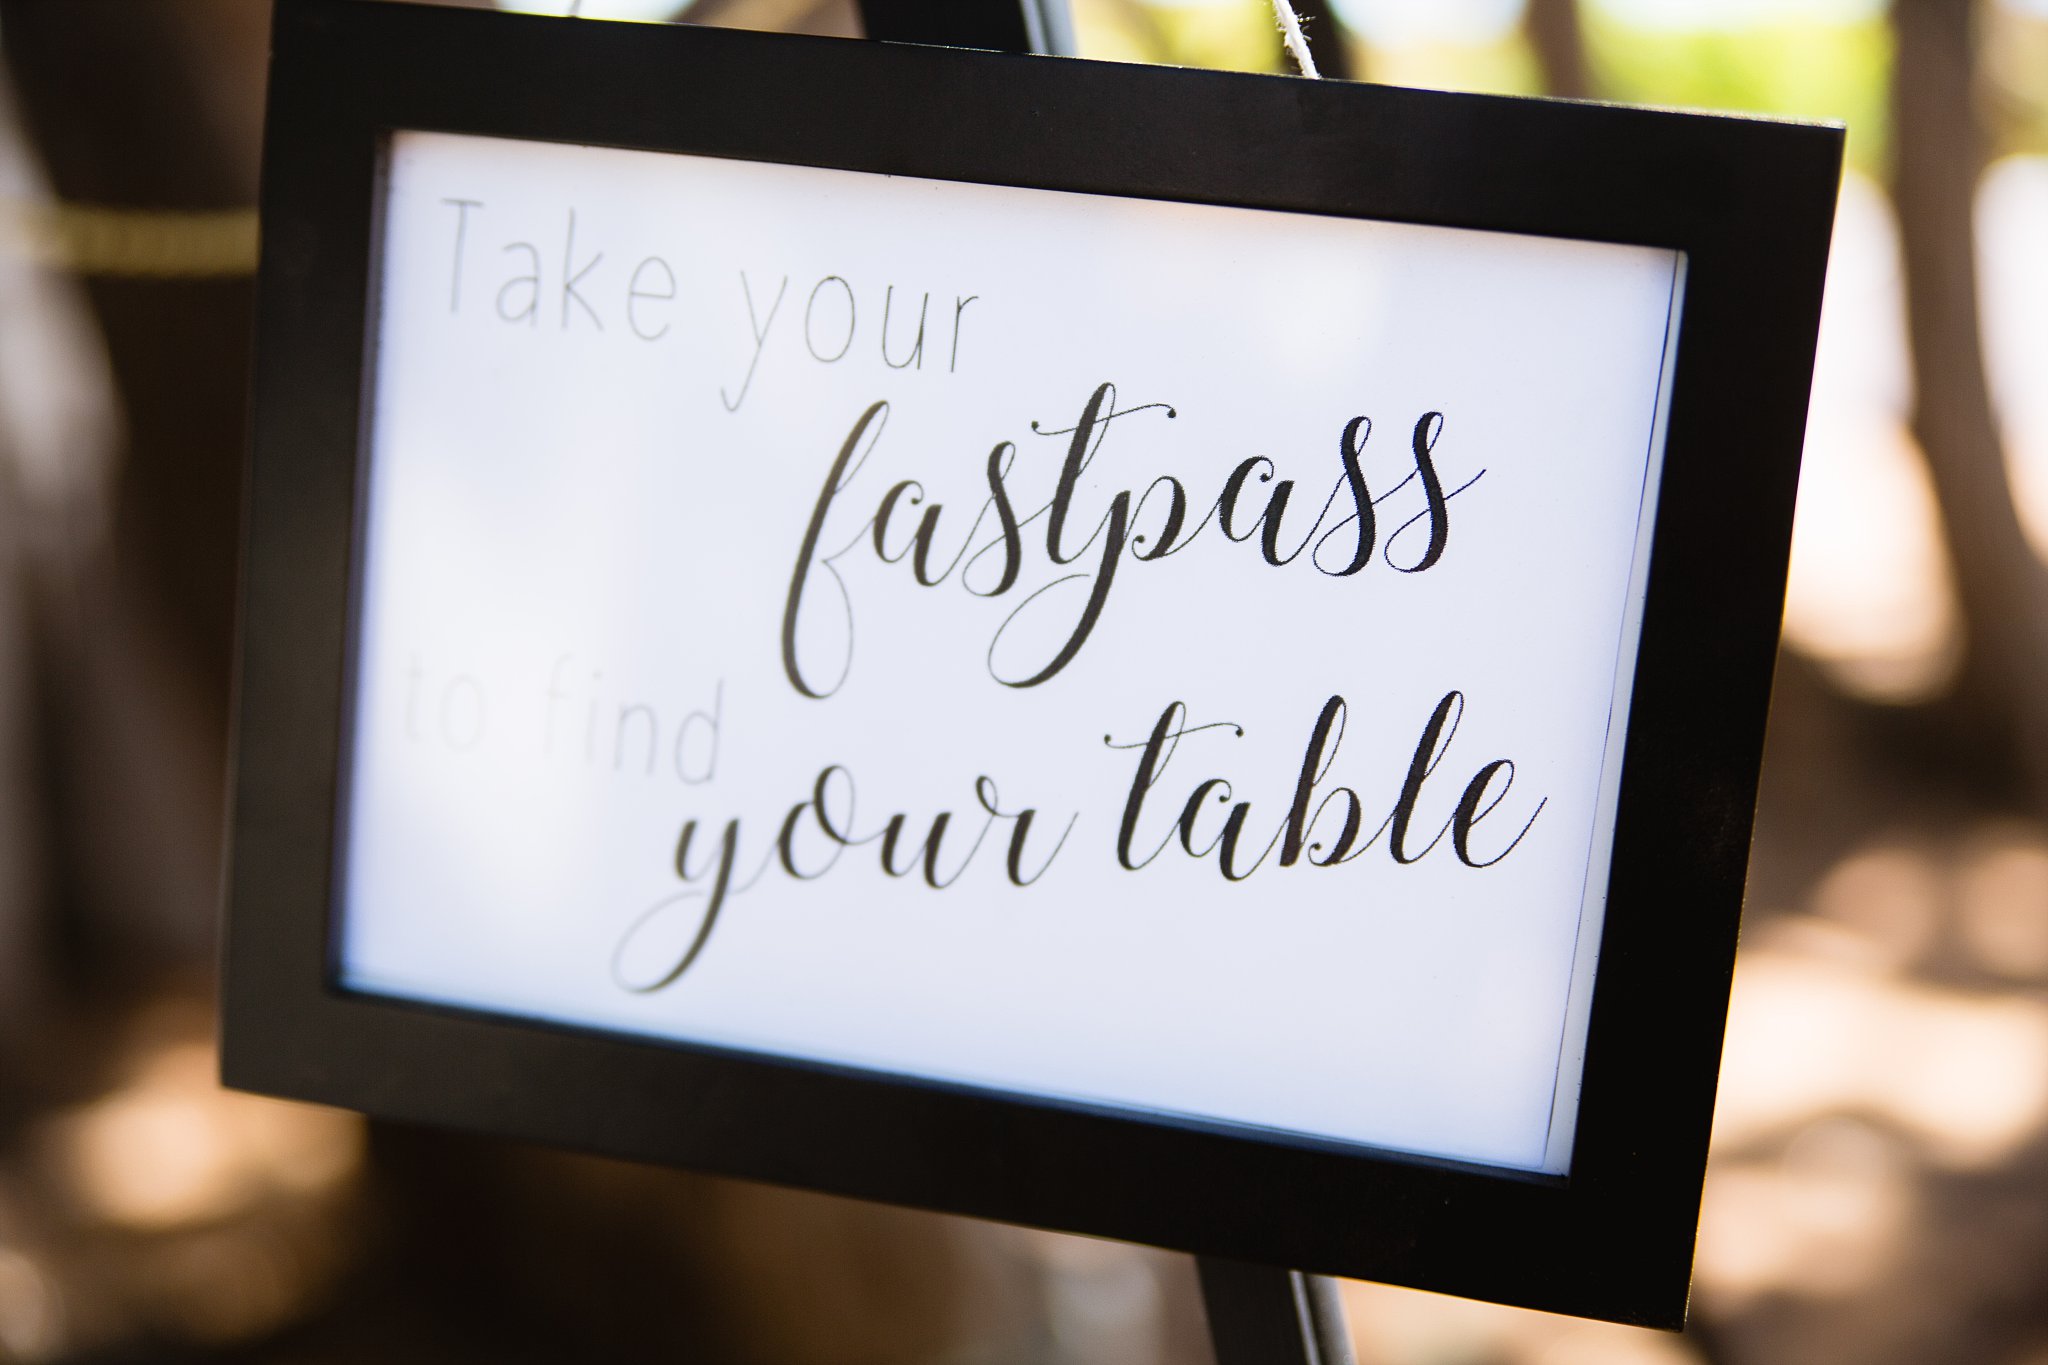 Disneyland inspired fastpass escort cards for wedding reception by PMA Photography.